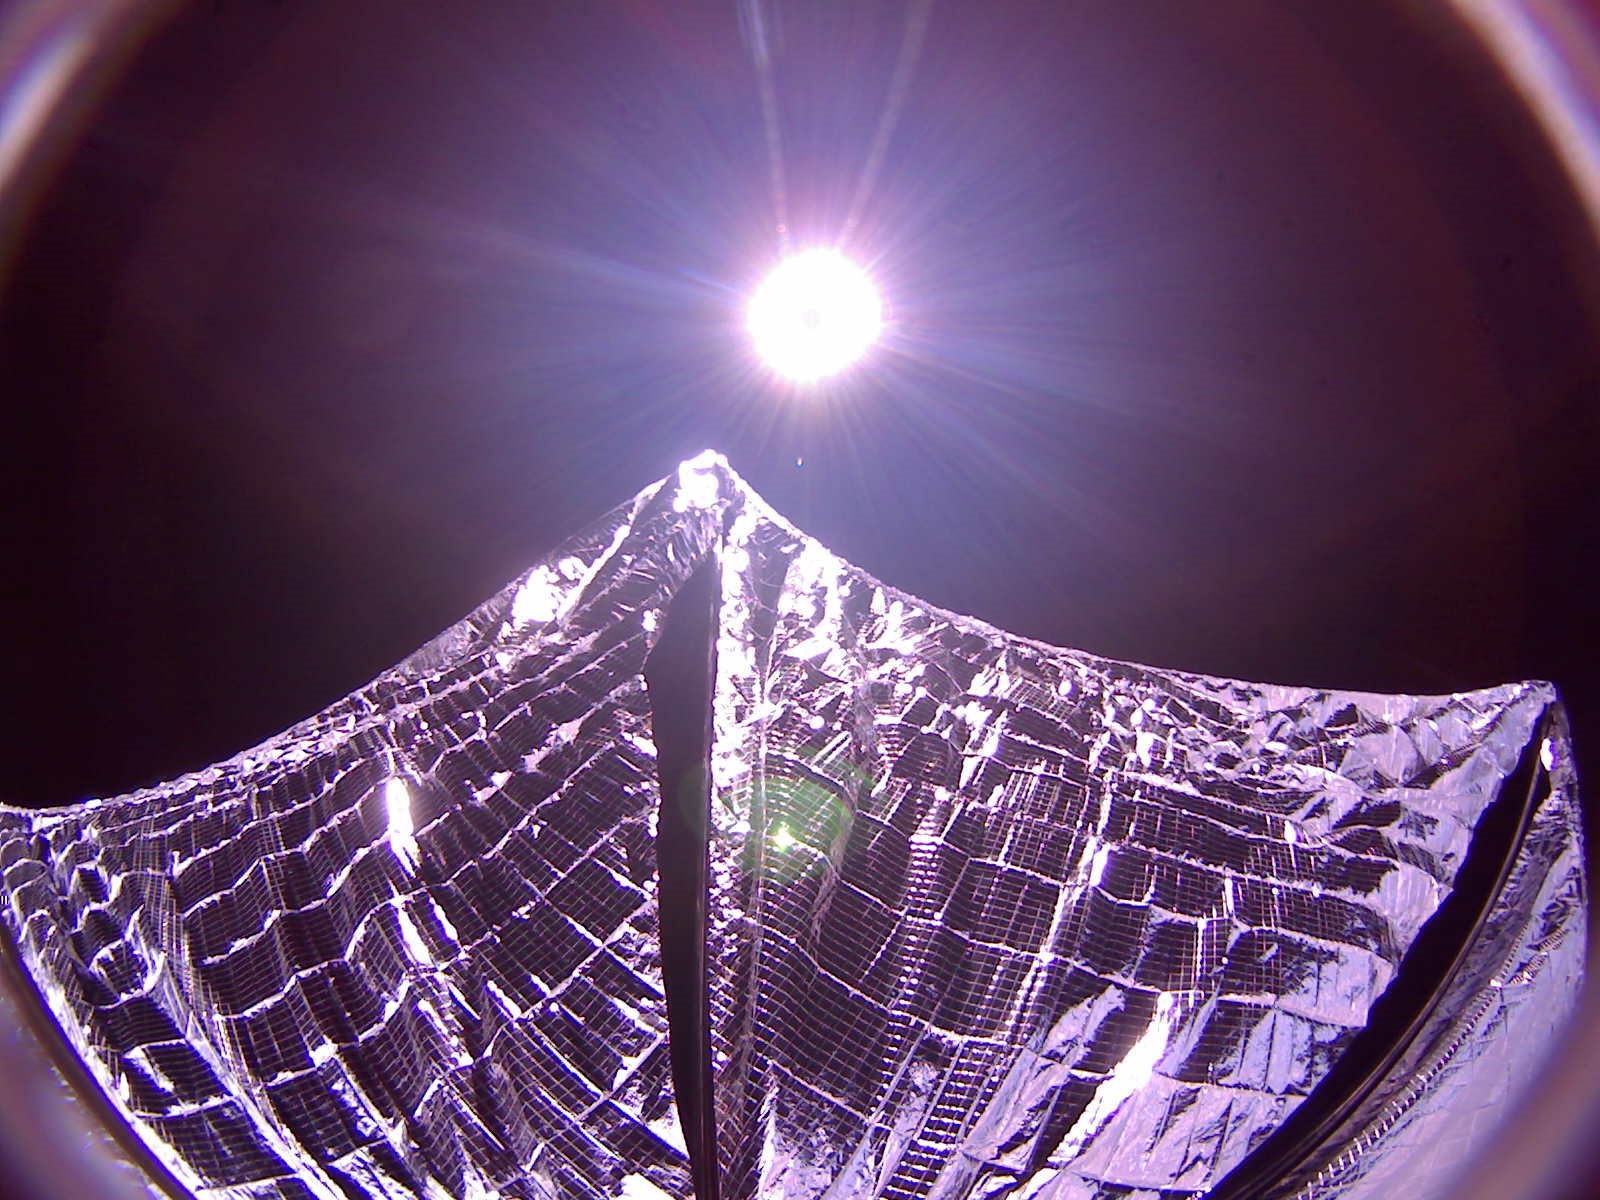 LightSail 1 with a deployed solar sail. Image credit: The Planetary Society.